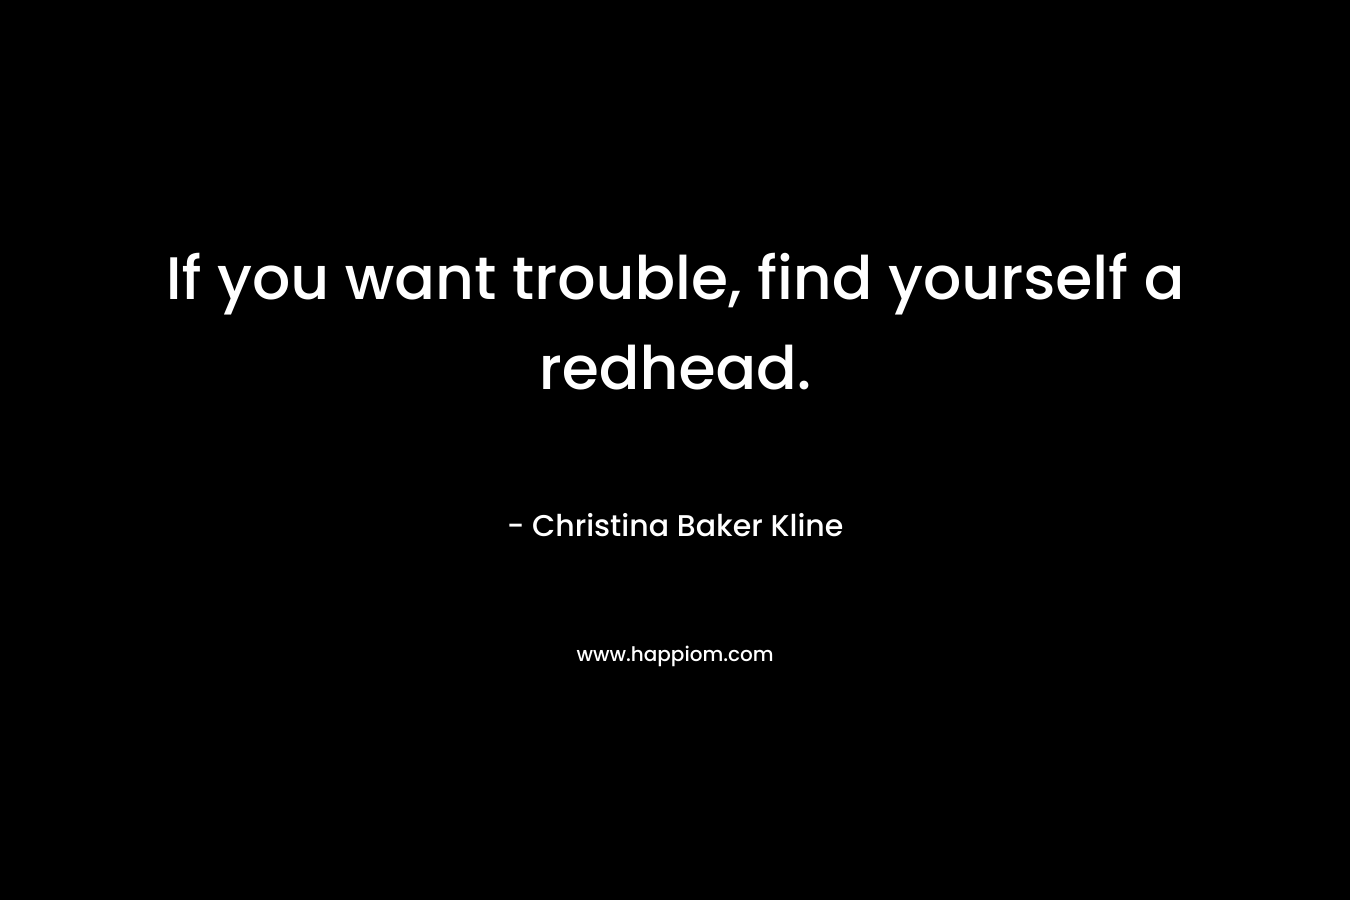 If you want trouble, find yourself a redhead. – Christina Baker Kline